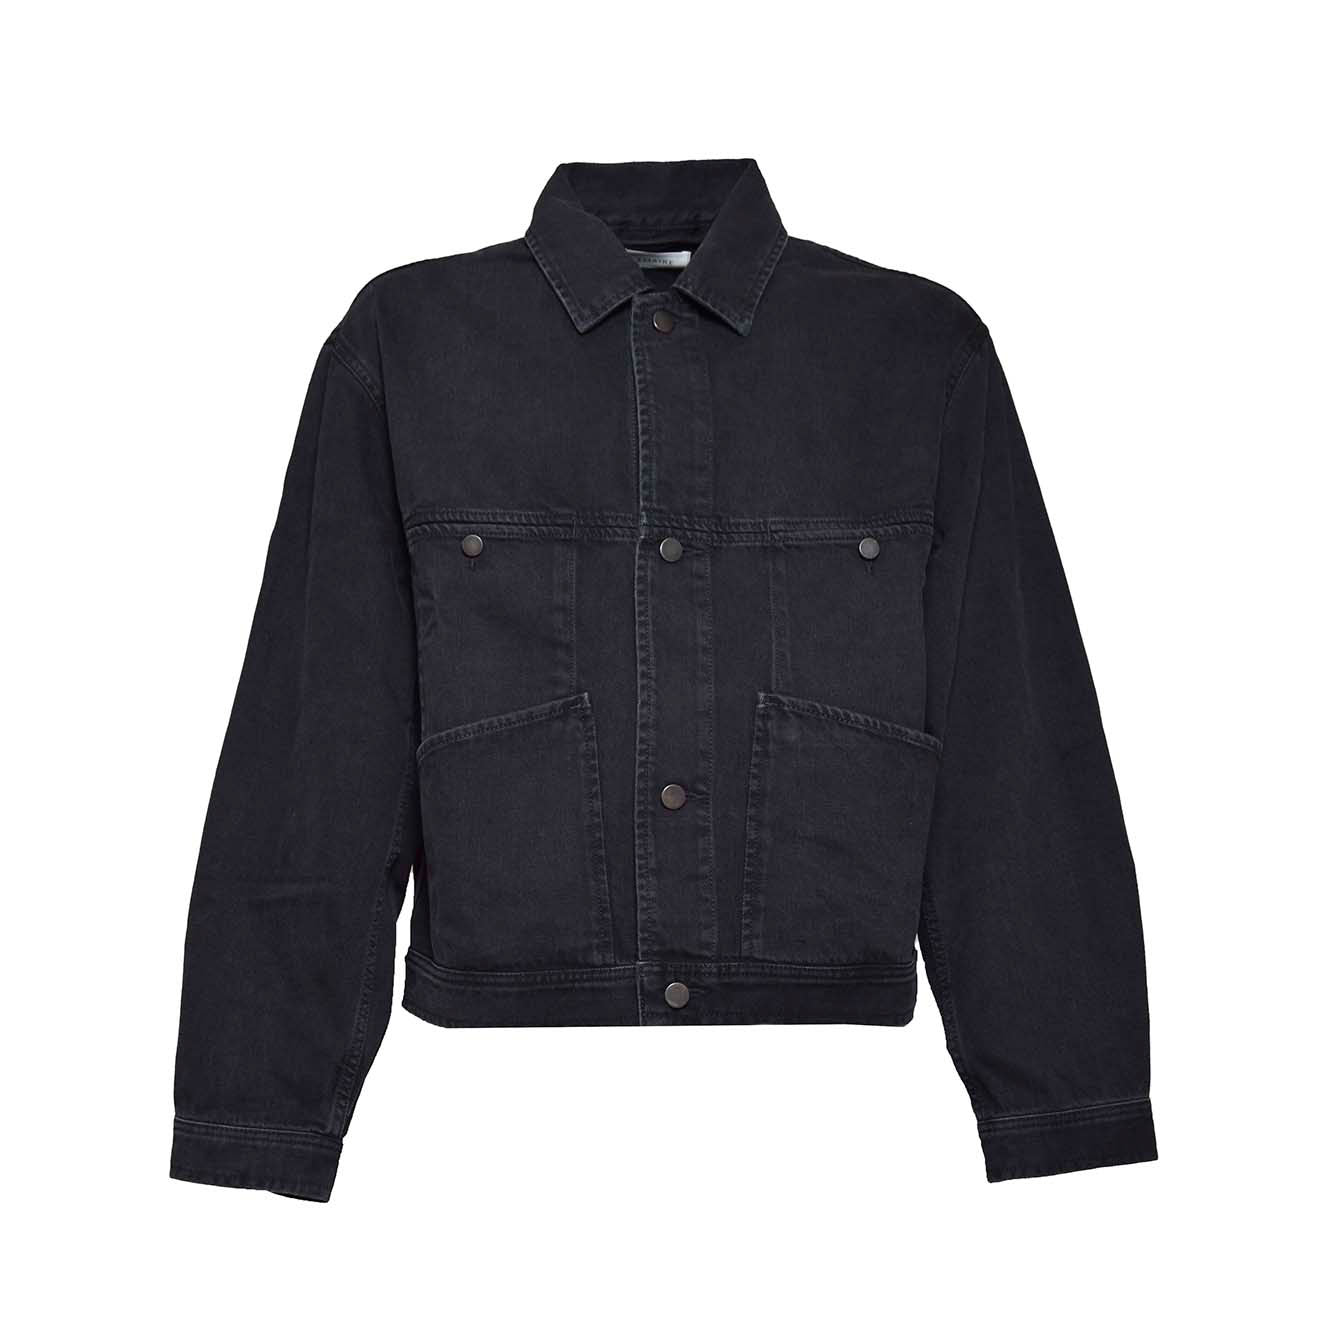 Giacca over in denim nero Lemaire